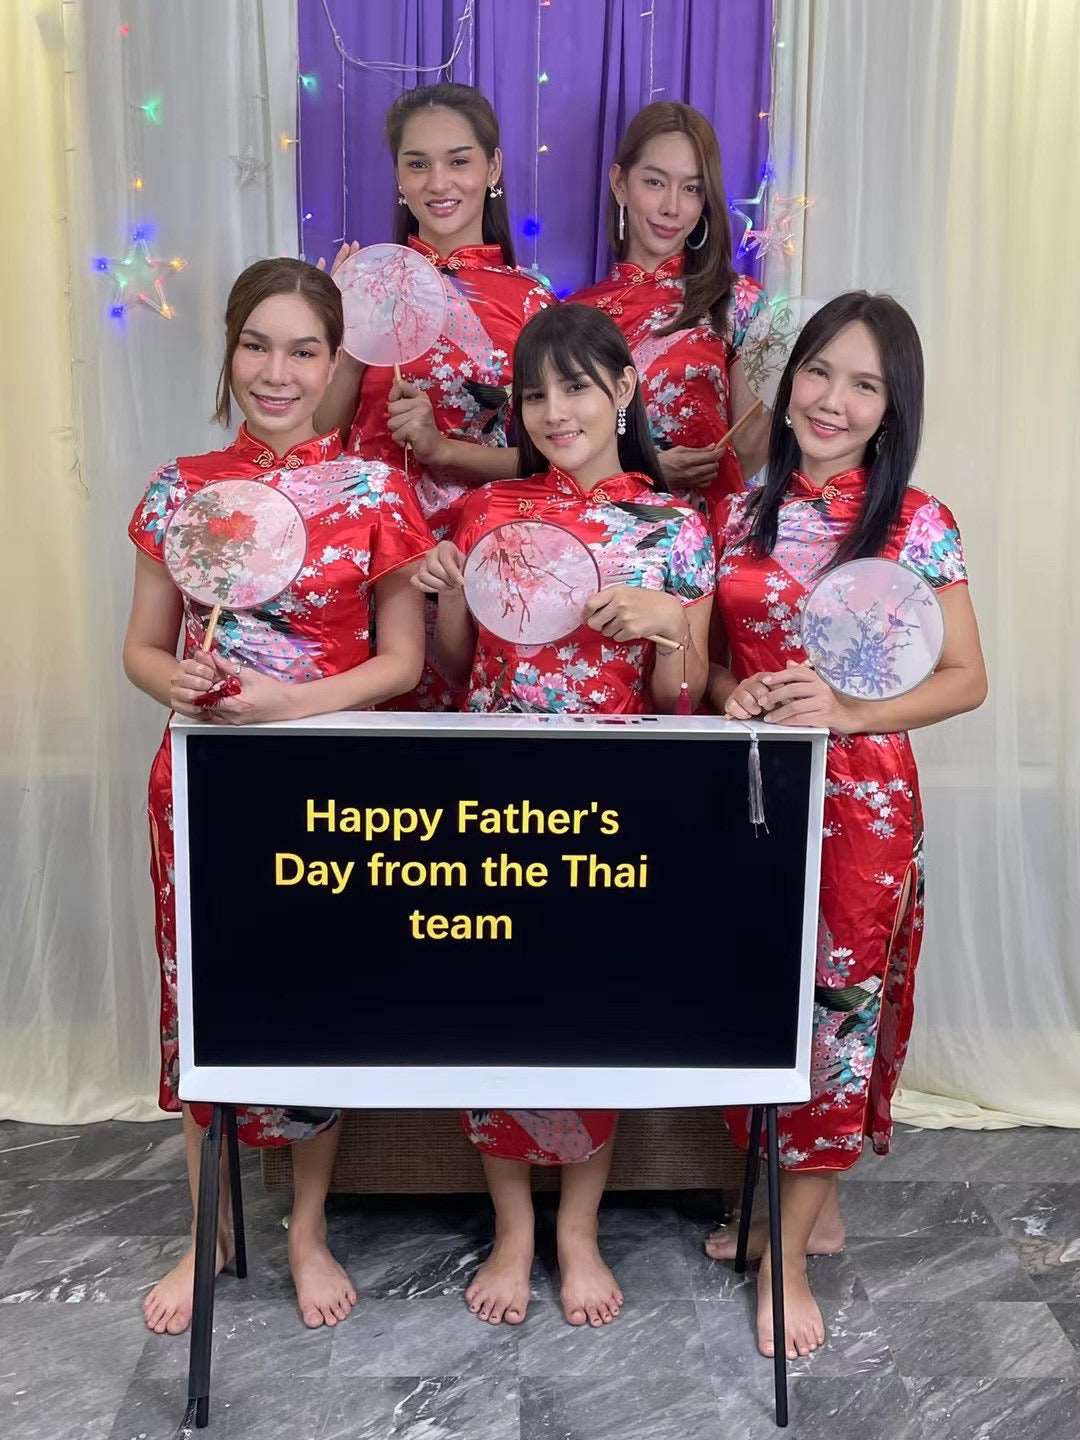 Greeting video from Thailand